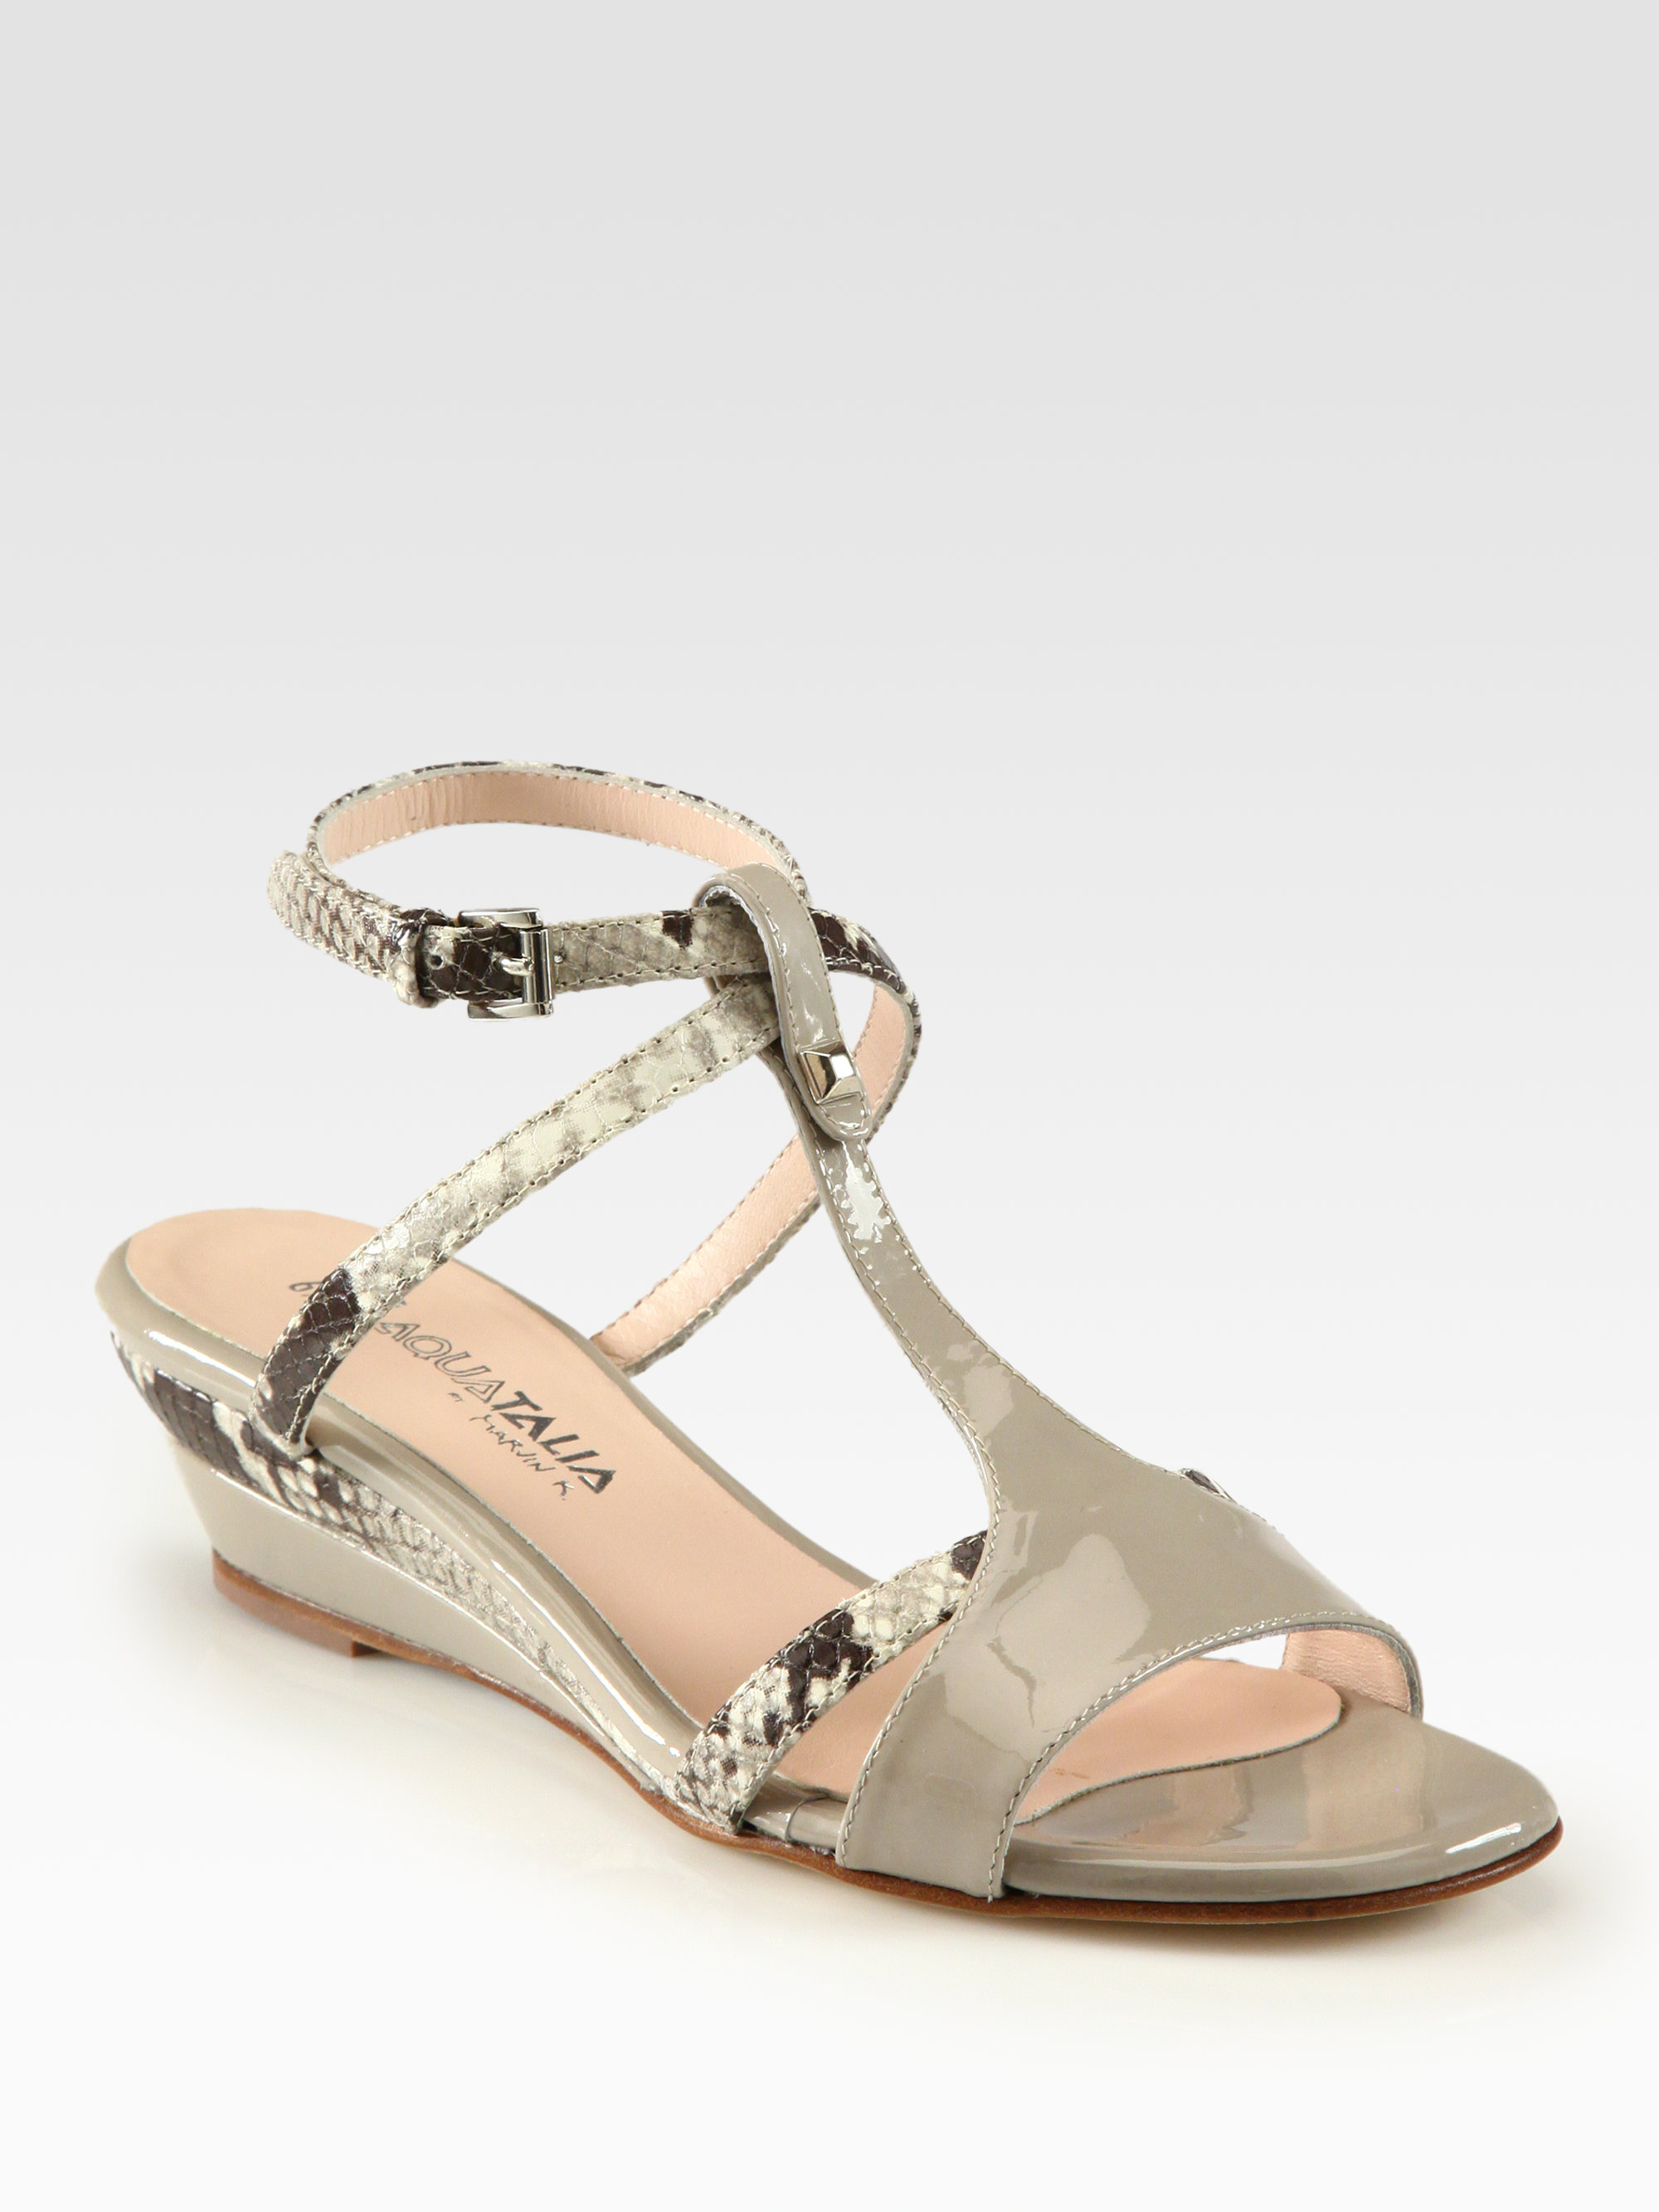 Aquatalia By Marvin K Fiorella Python Patent Leather Wedge Sandals in ...